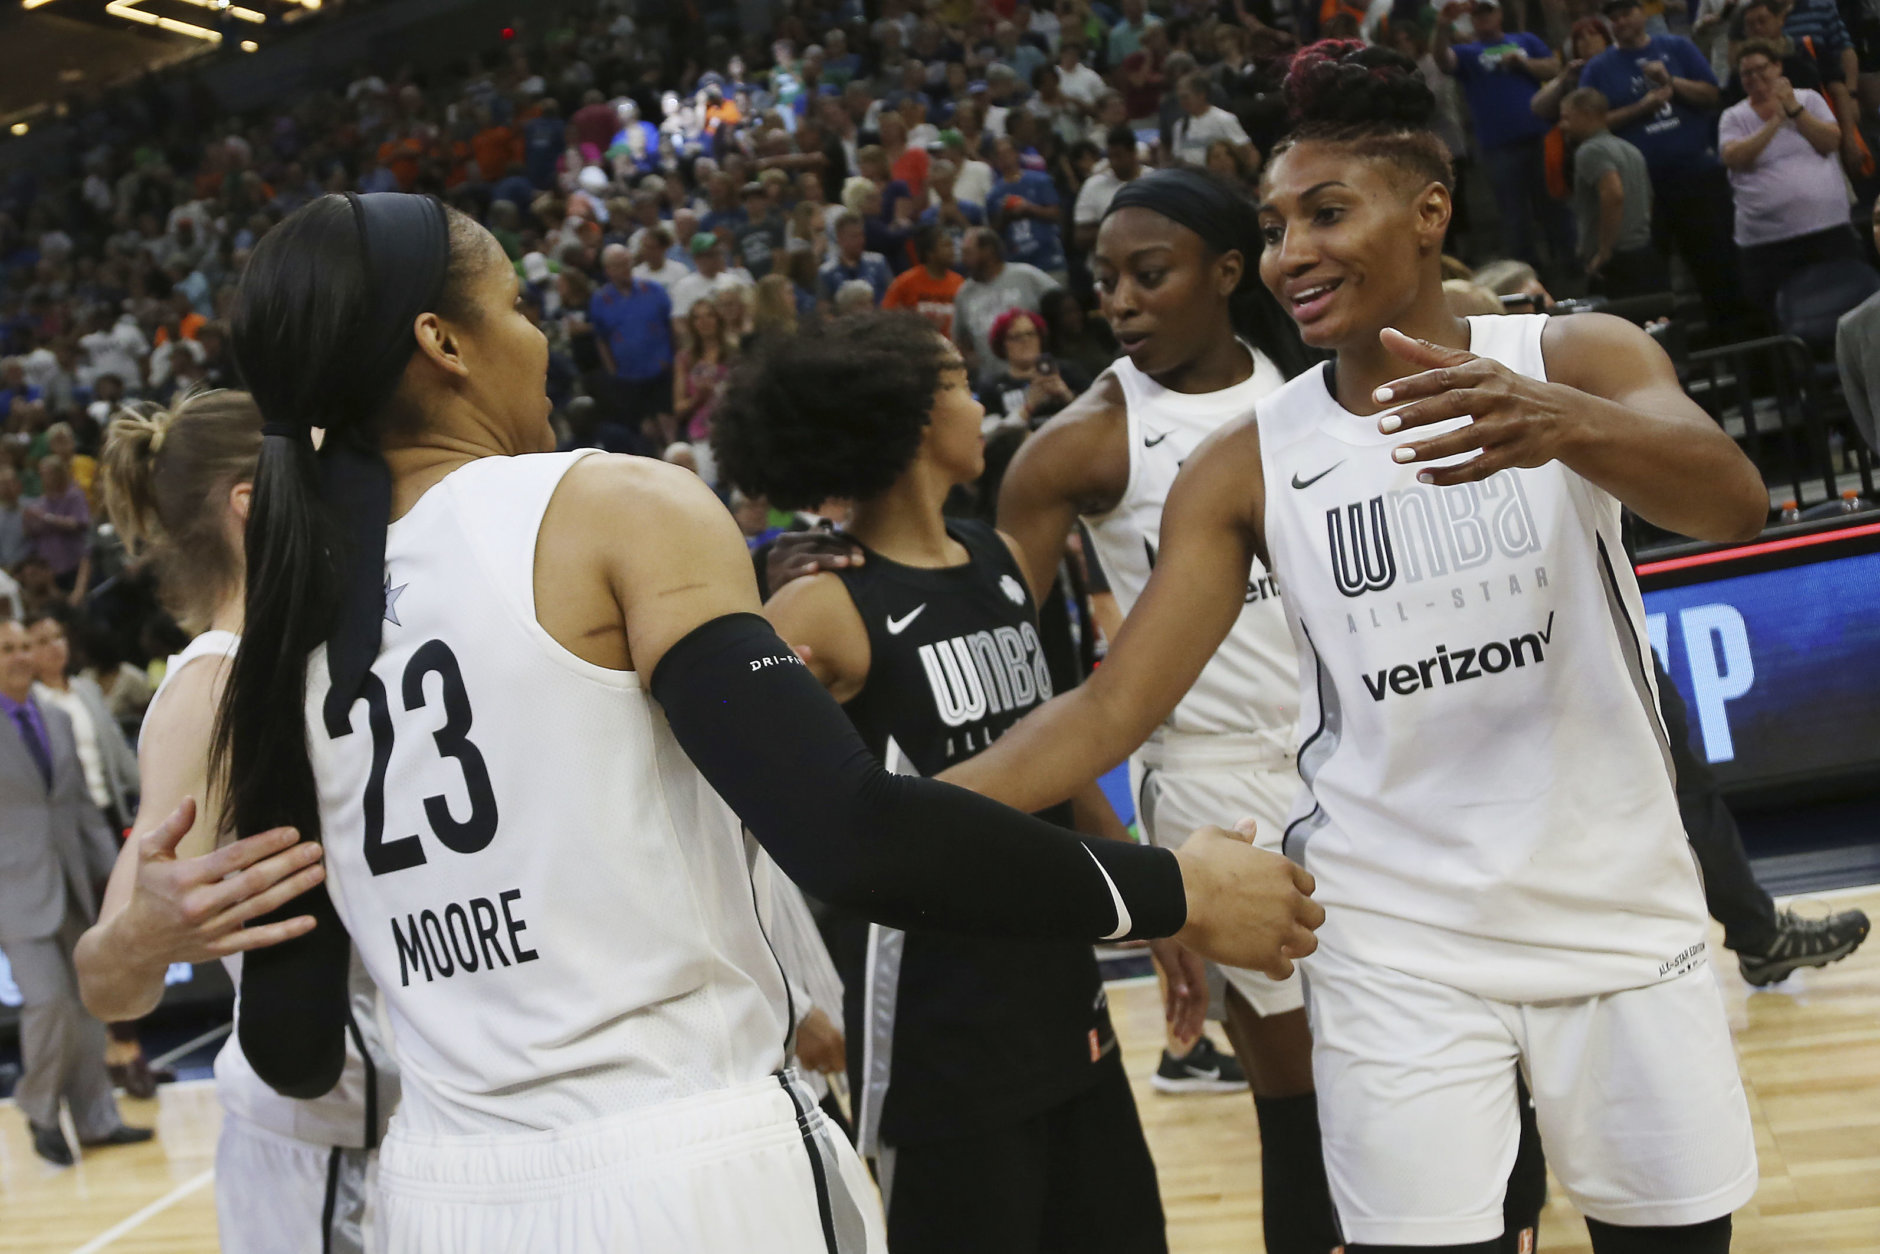 Team Candace Parker's Maya Moore, left, and Angel McCoughtry, right, celebrate after their team won 119-112 against Team Delle Donne in the WNBA All-Star basketball game Saturday, July 28, 2018 in Minneapolis. (AP Photo/Stacy Bengs)